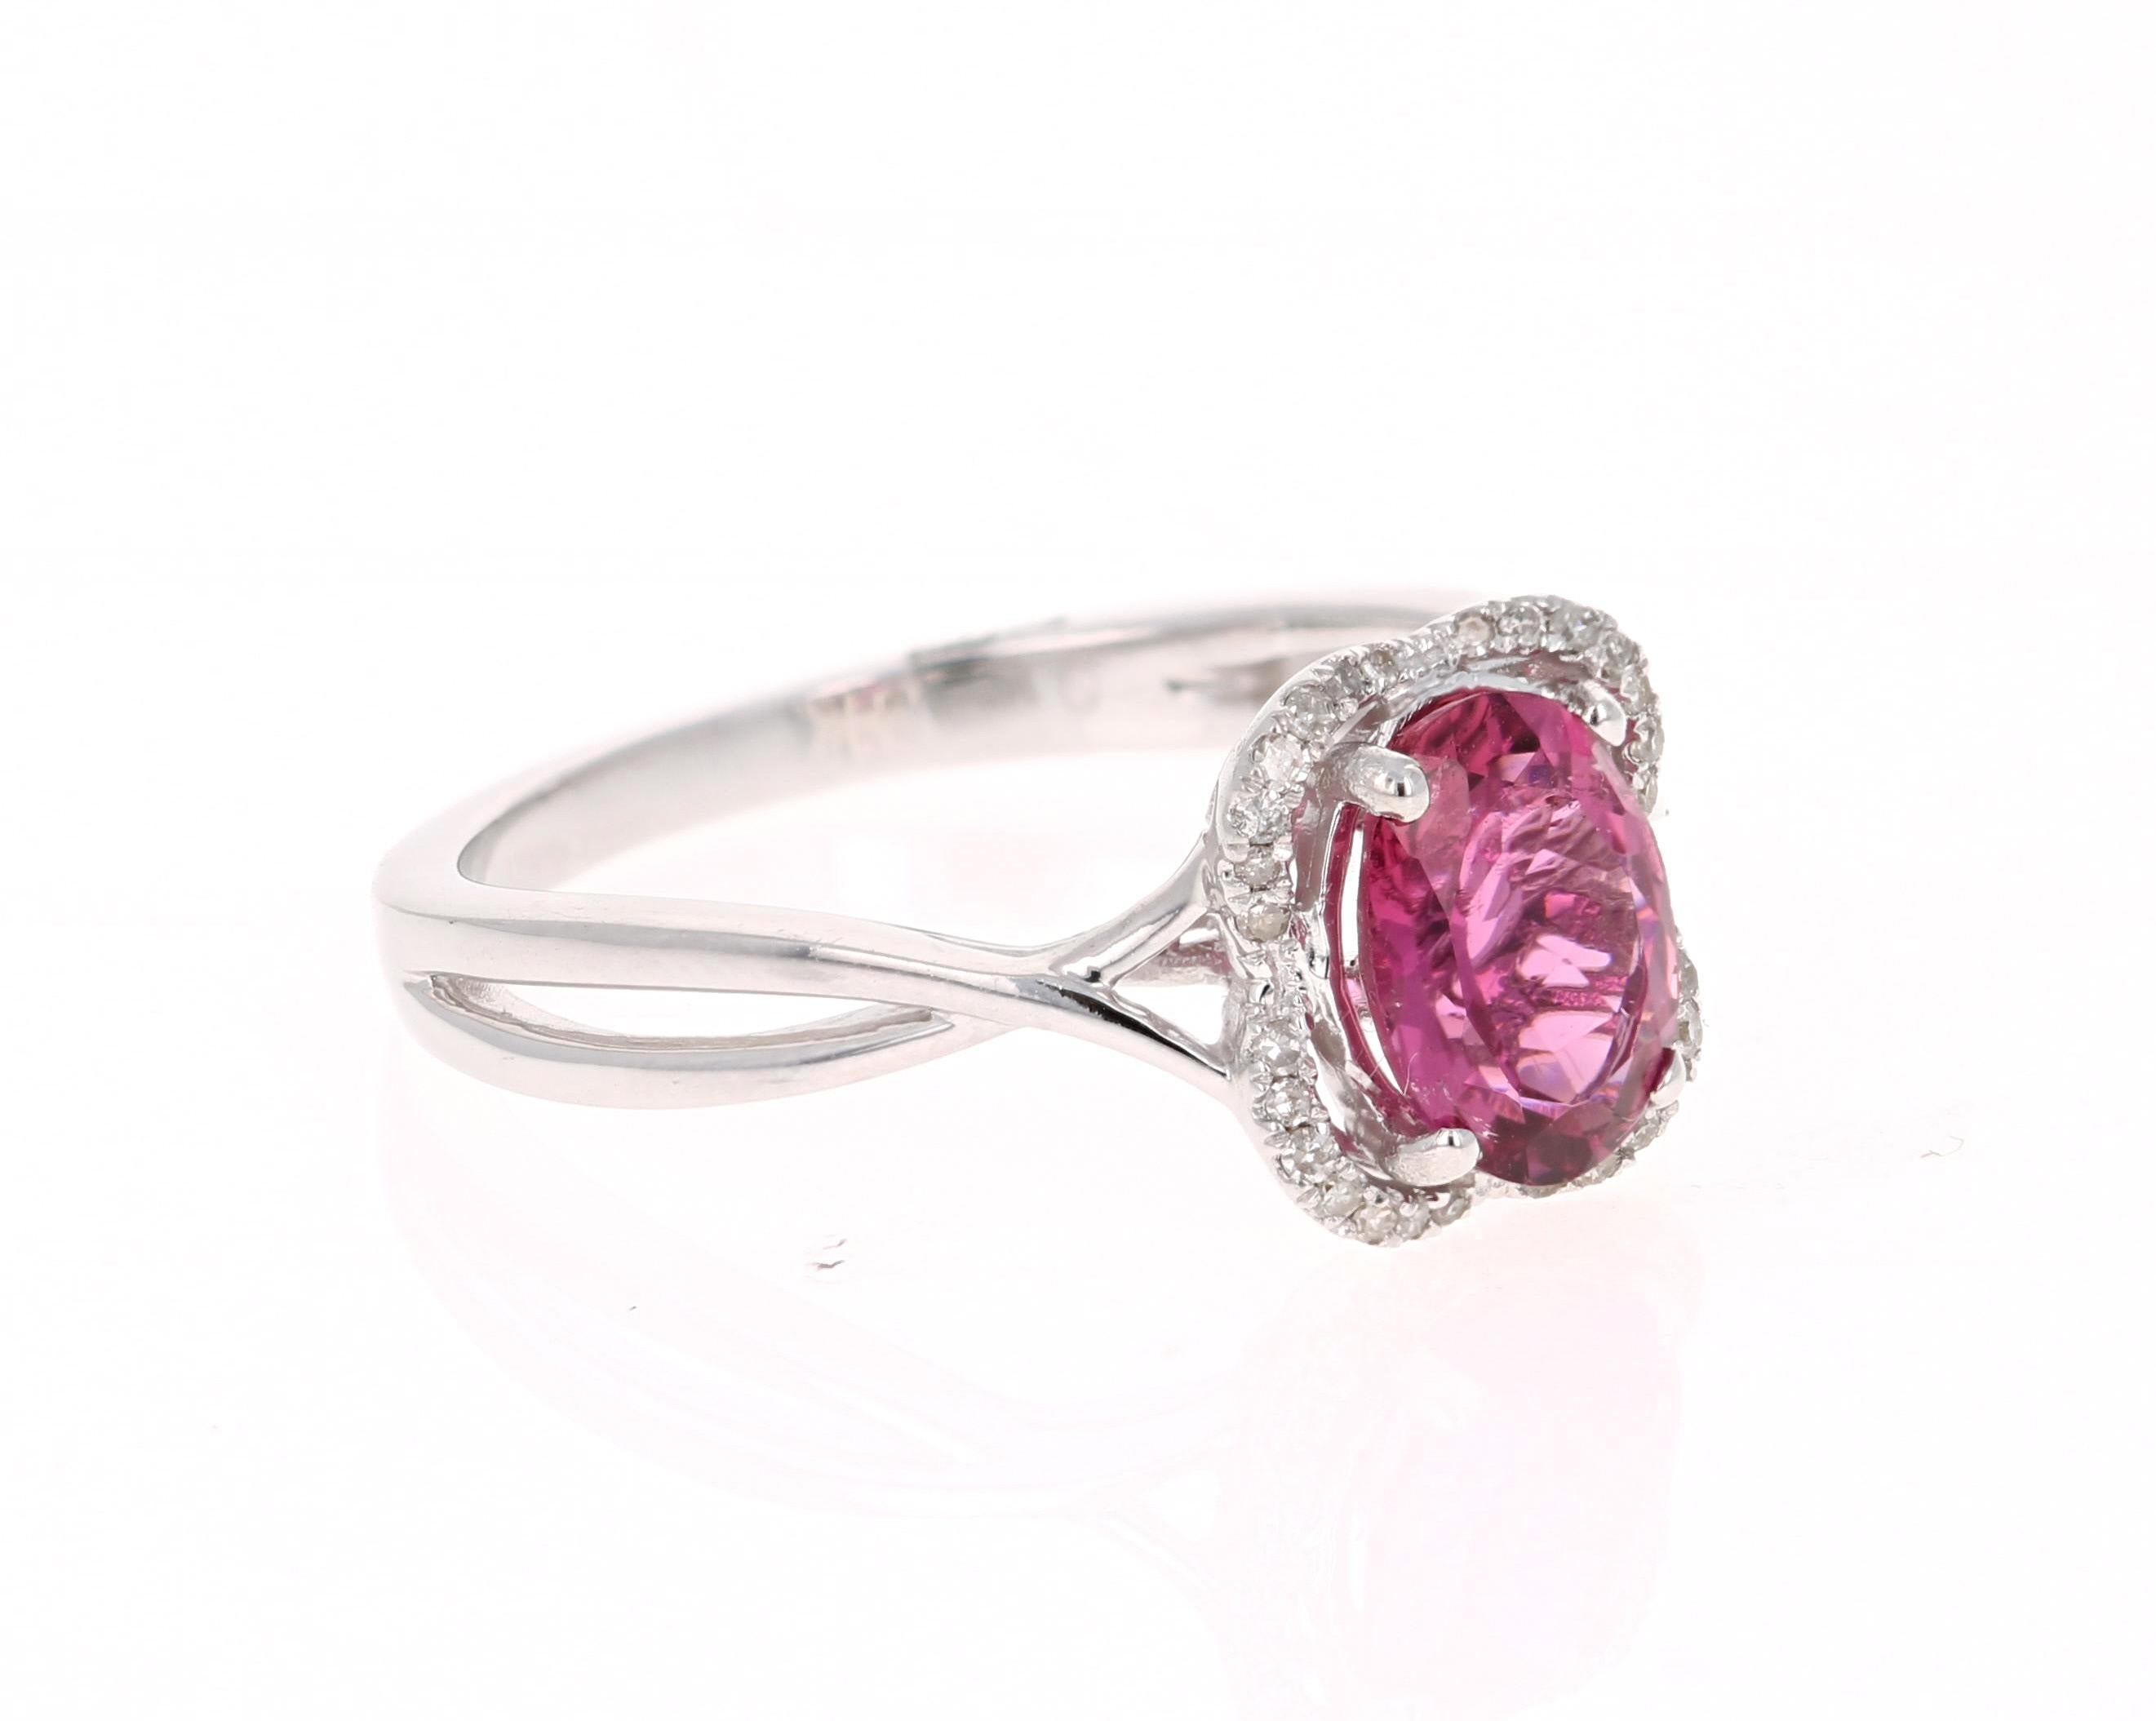 Beautiful Pink Tourmaline and Diamond Ring!

This ring has a gorgeous Oval Cut Pink Tourmaline that weighs 1.26 Carats. Floating around the tourmaline are 28 Round Cut Diamonds that weigh 0.12 Carats.

The total carat weight of the ring is 1.38